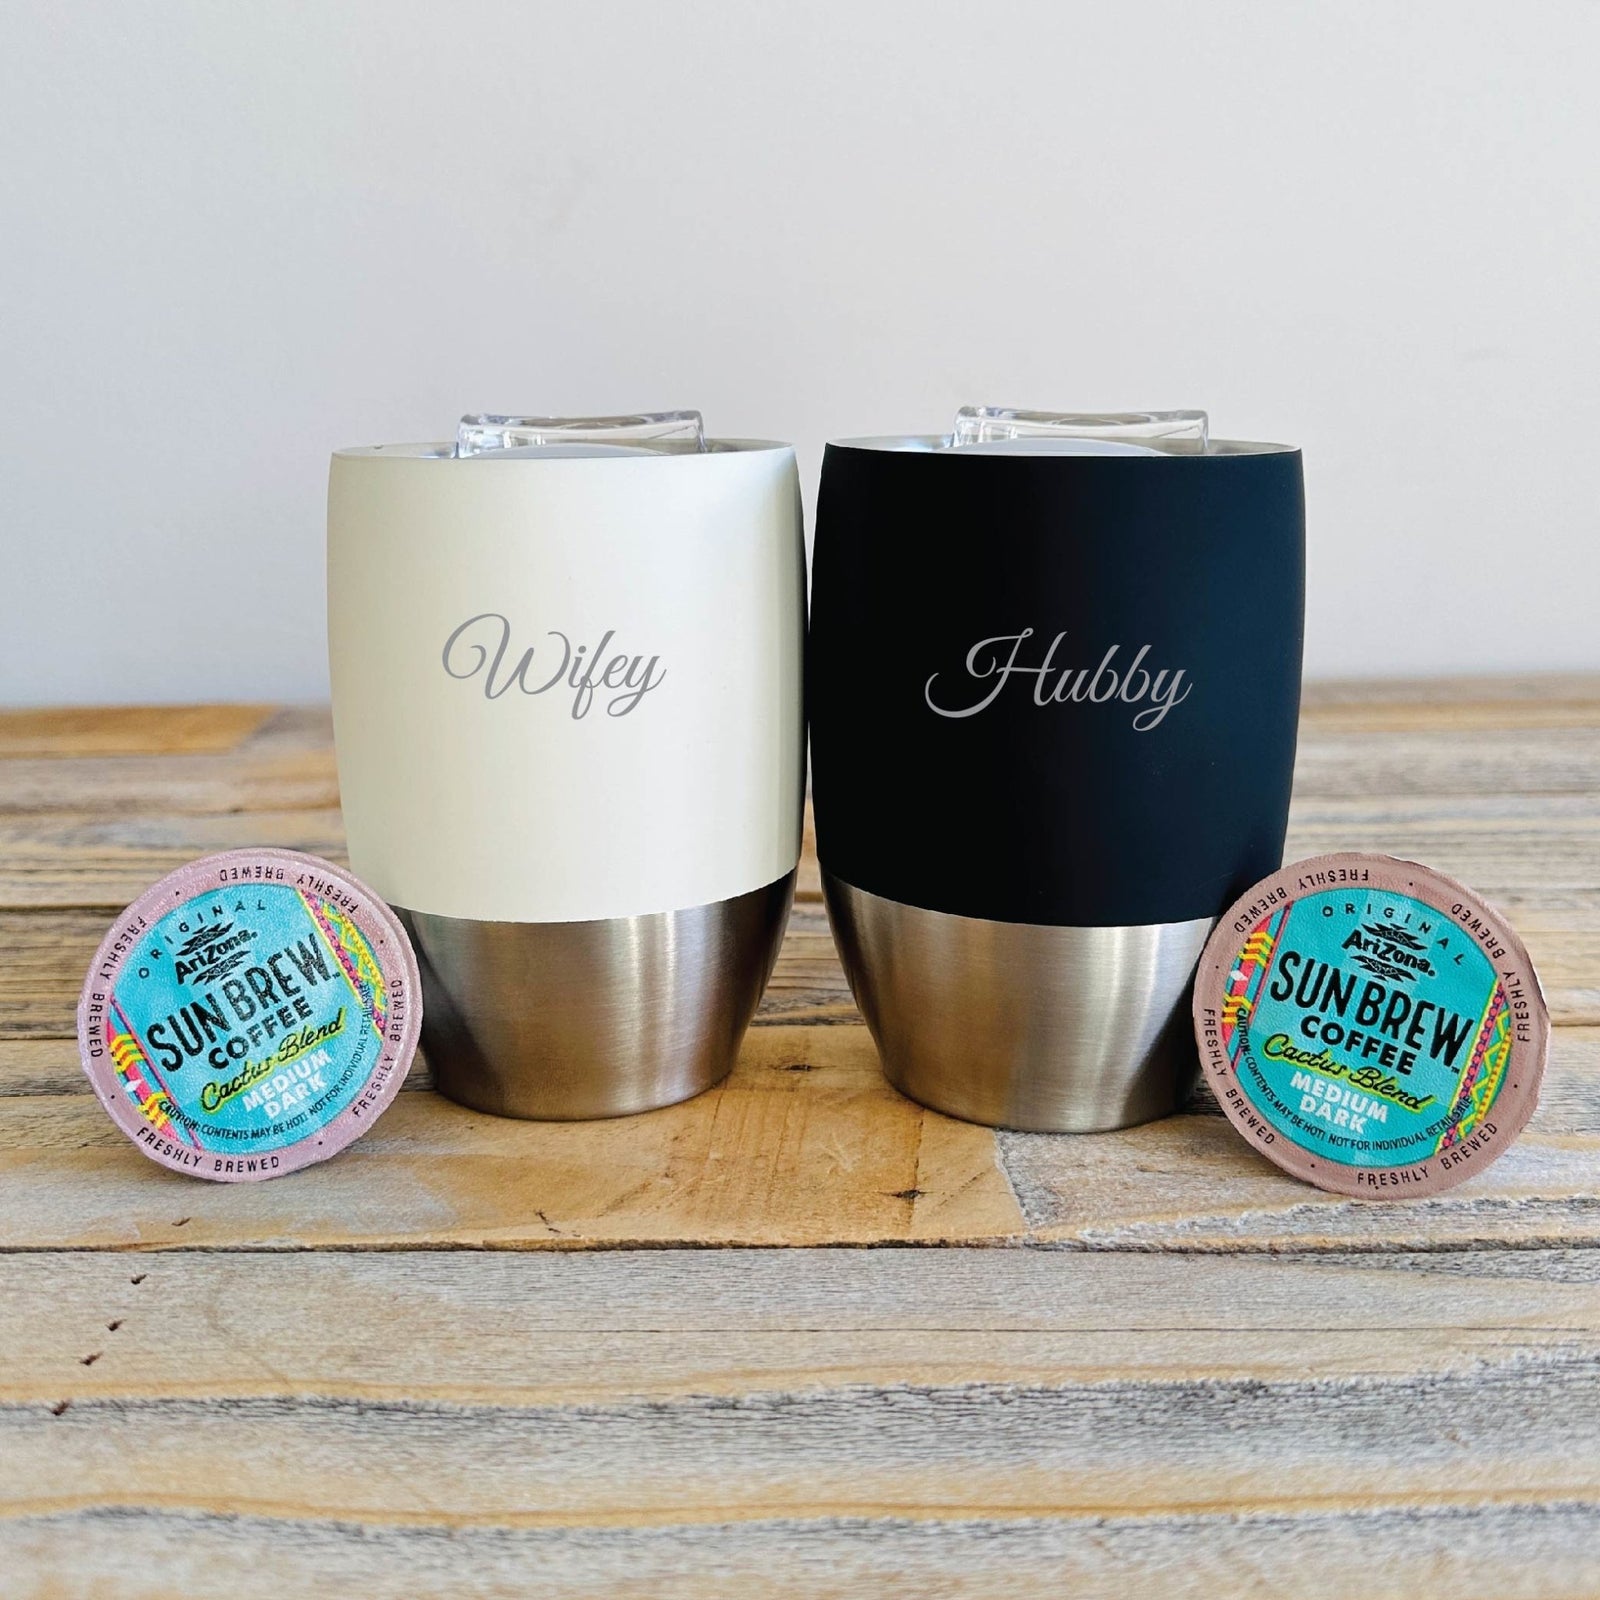 Yeti Wine Tumbler, Bride Gift, Wine Glass With Name, Personalized